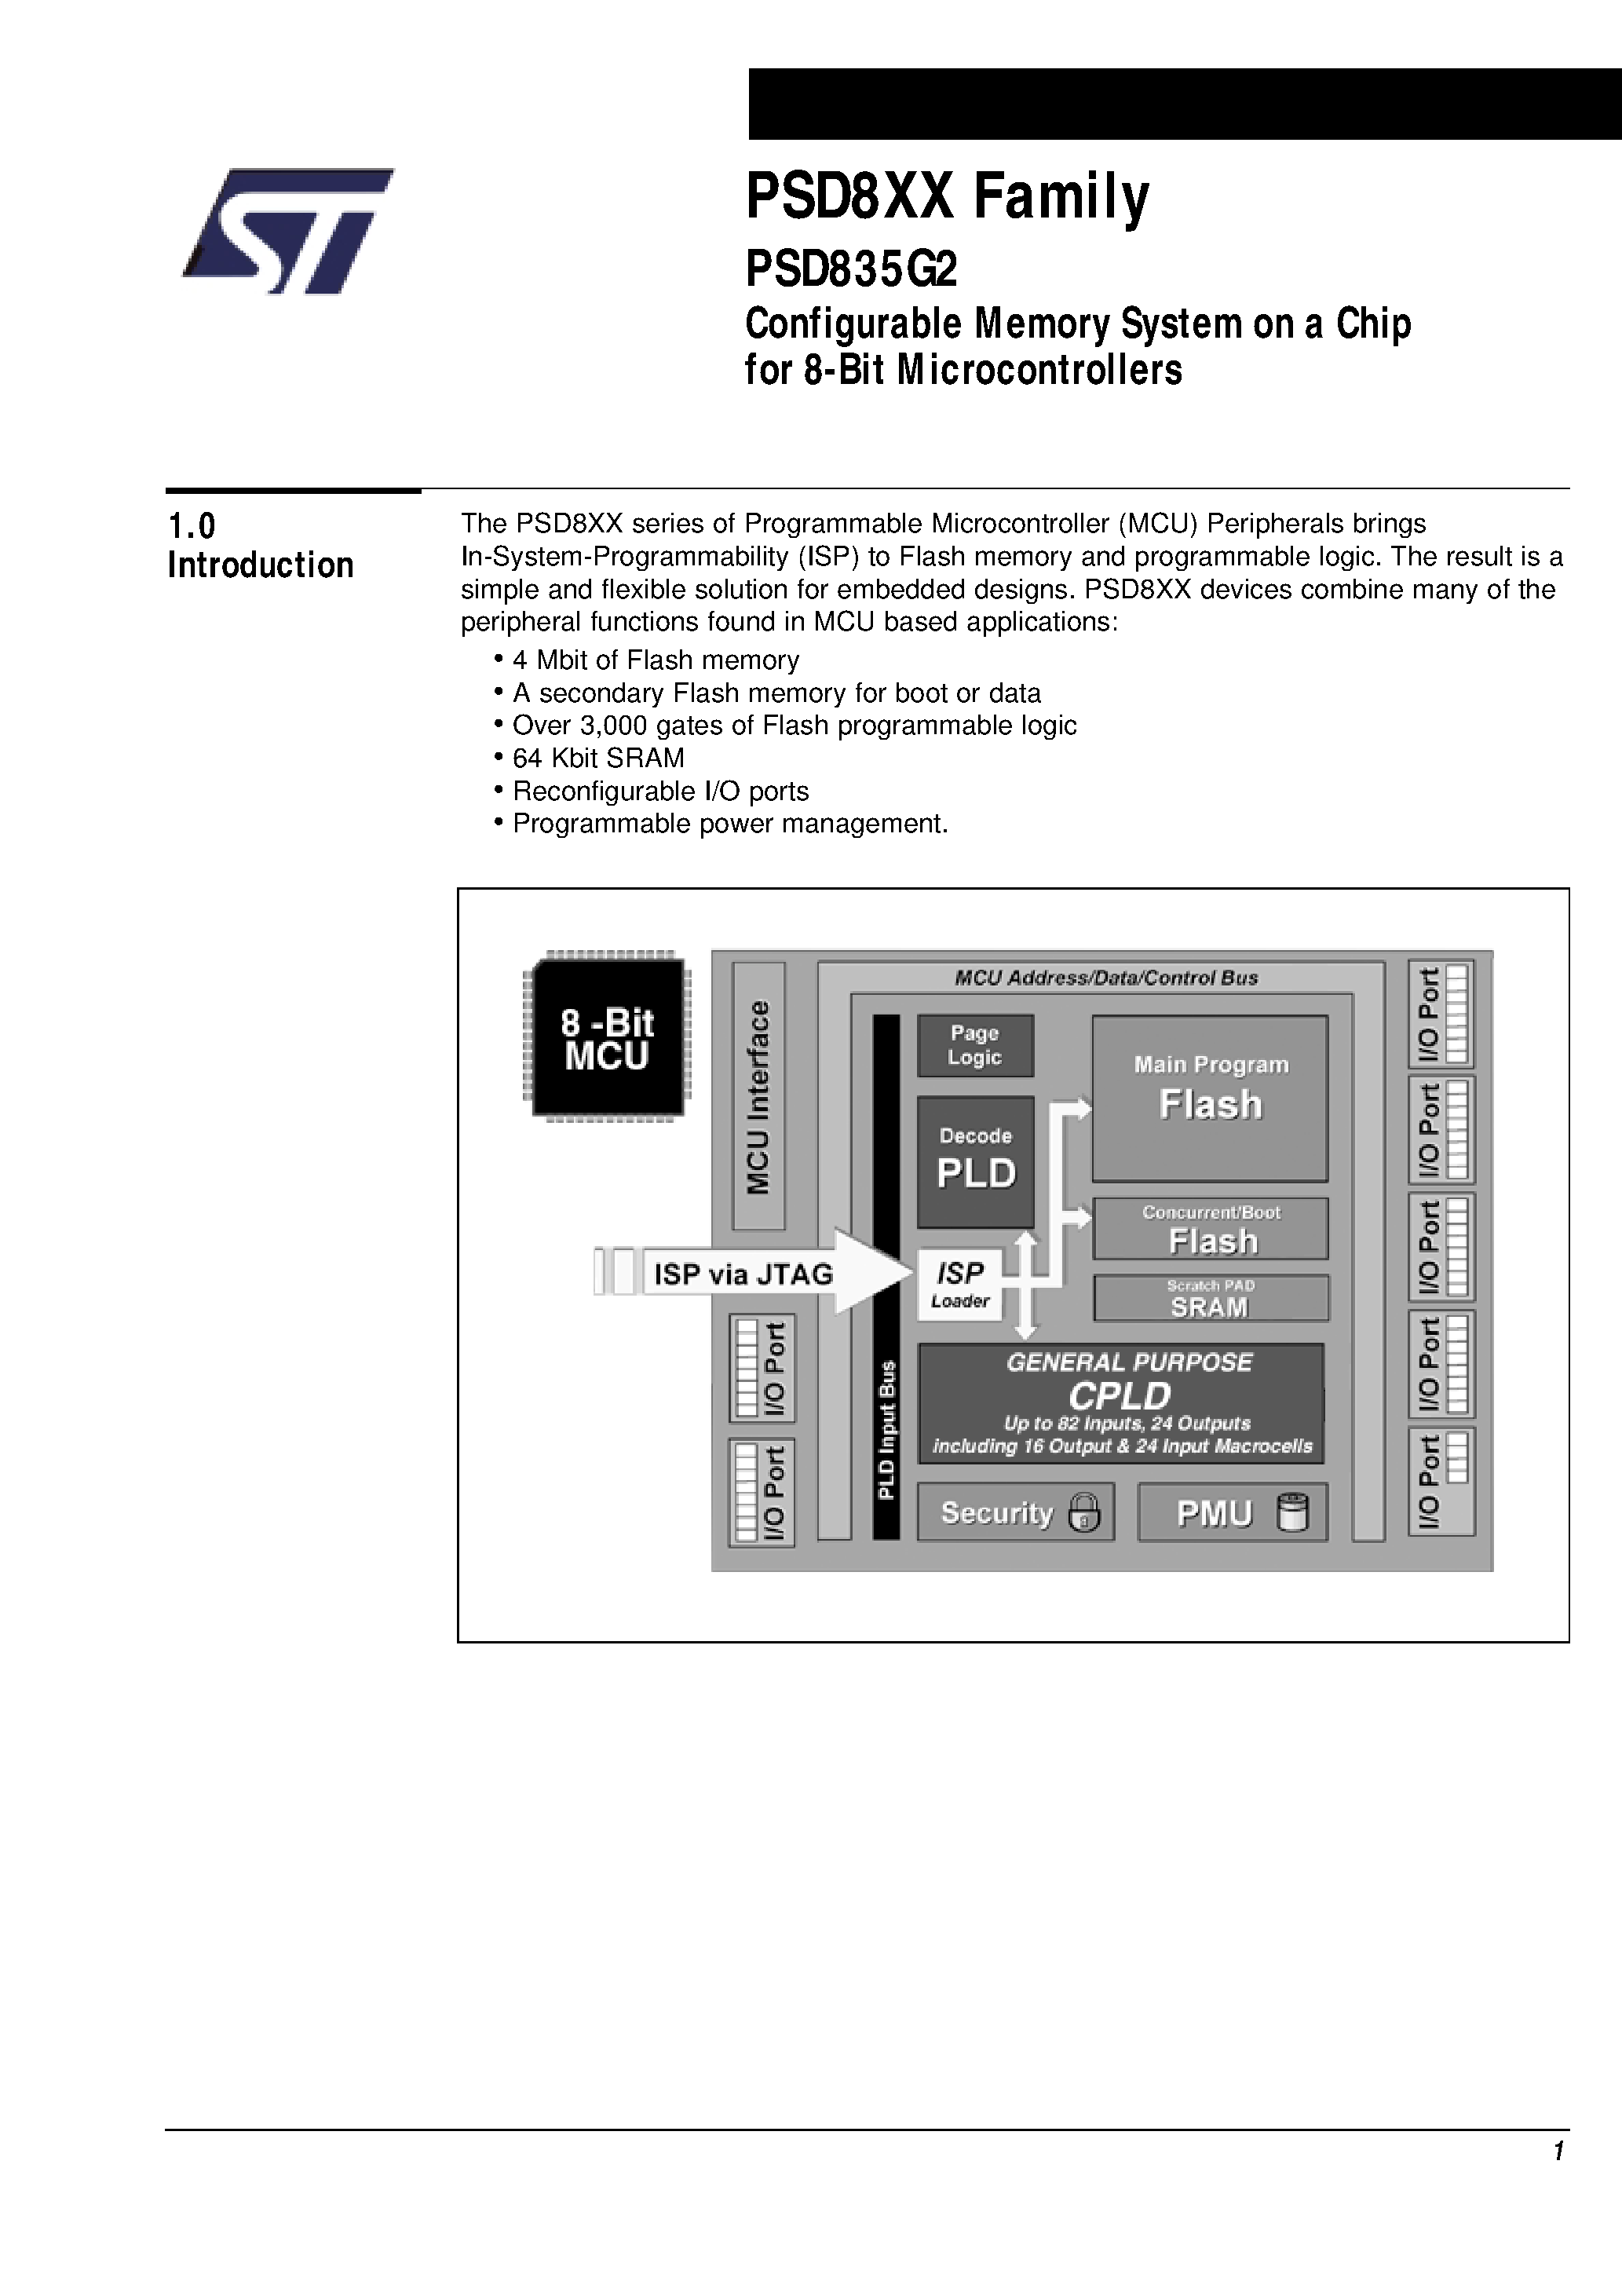 Datasheet PSD835F1V-A-12U - Configurable Memory System on a Chip for 8-Bit Microcontrollers page 2